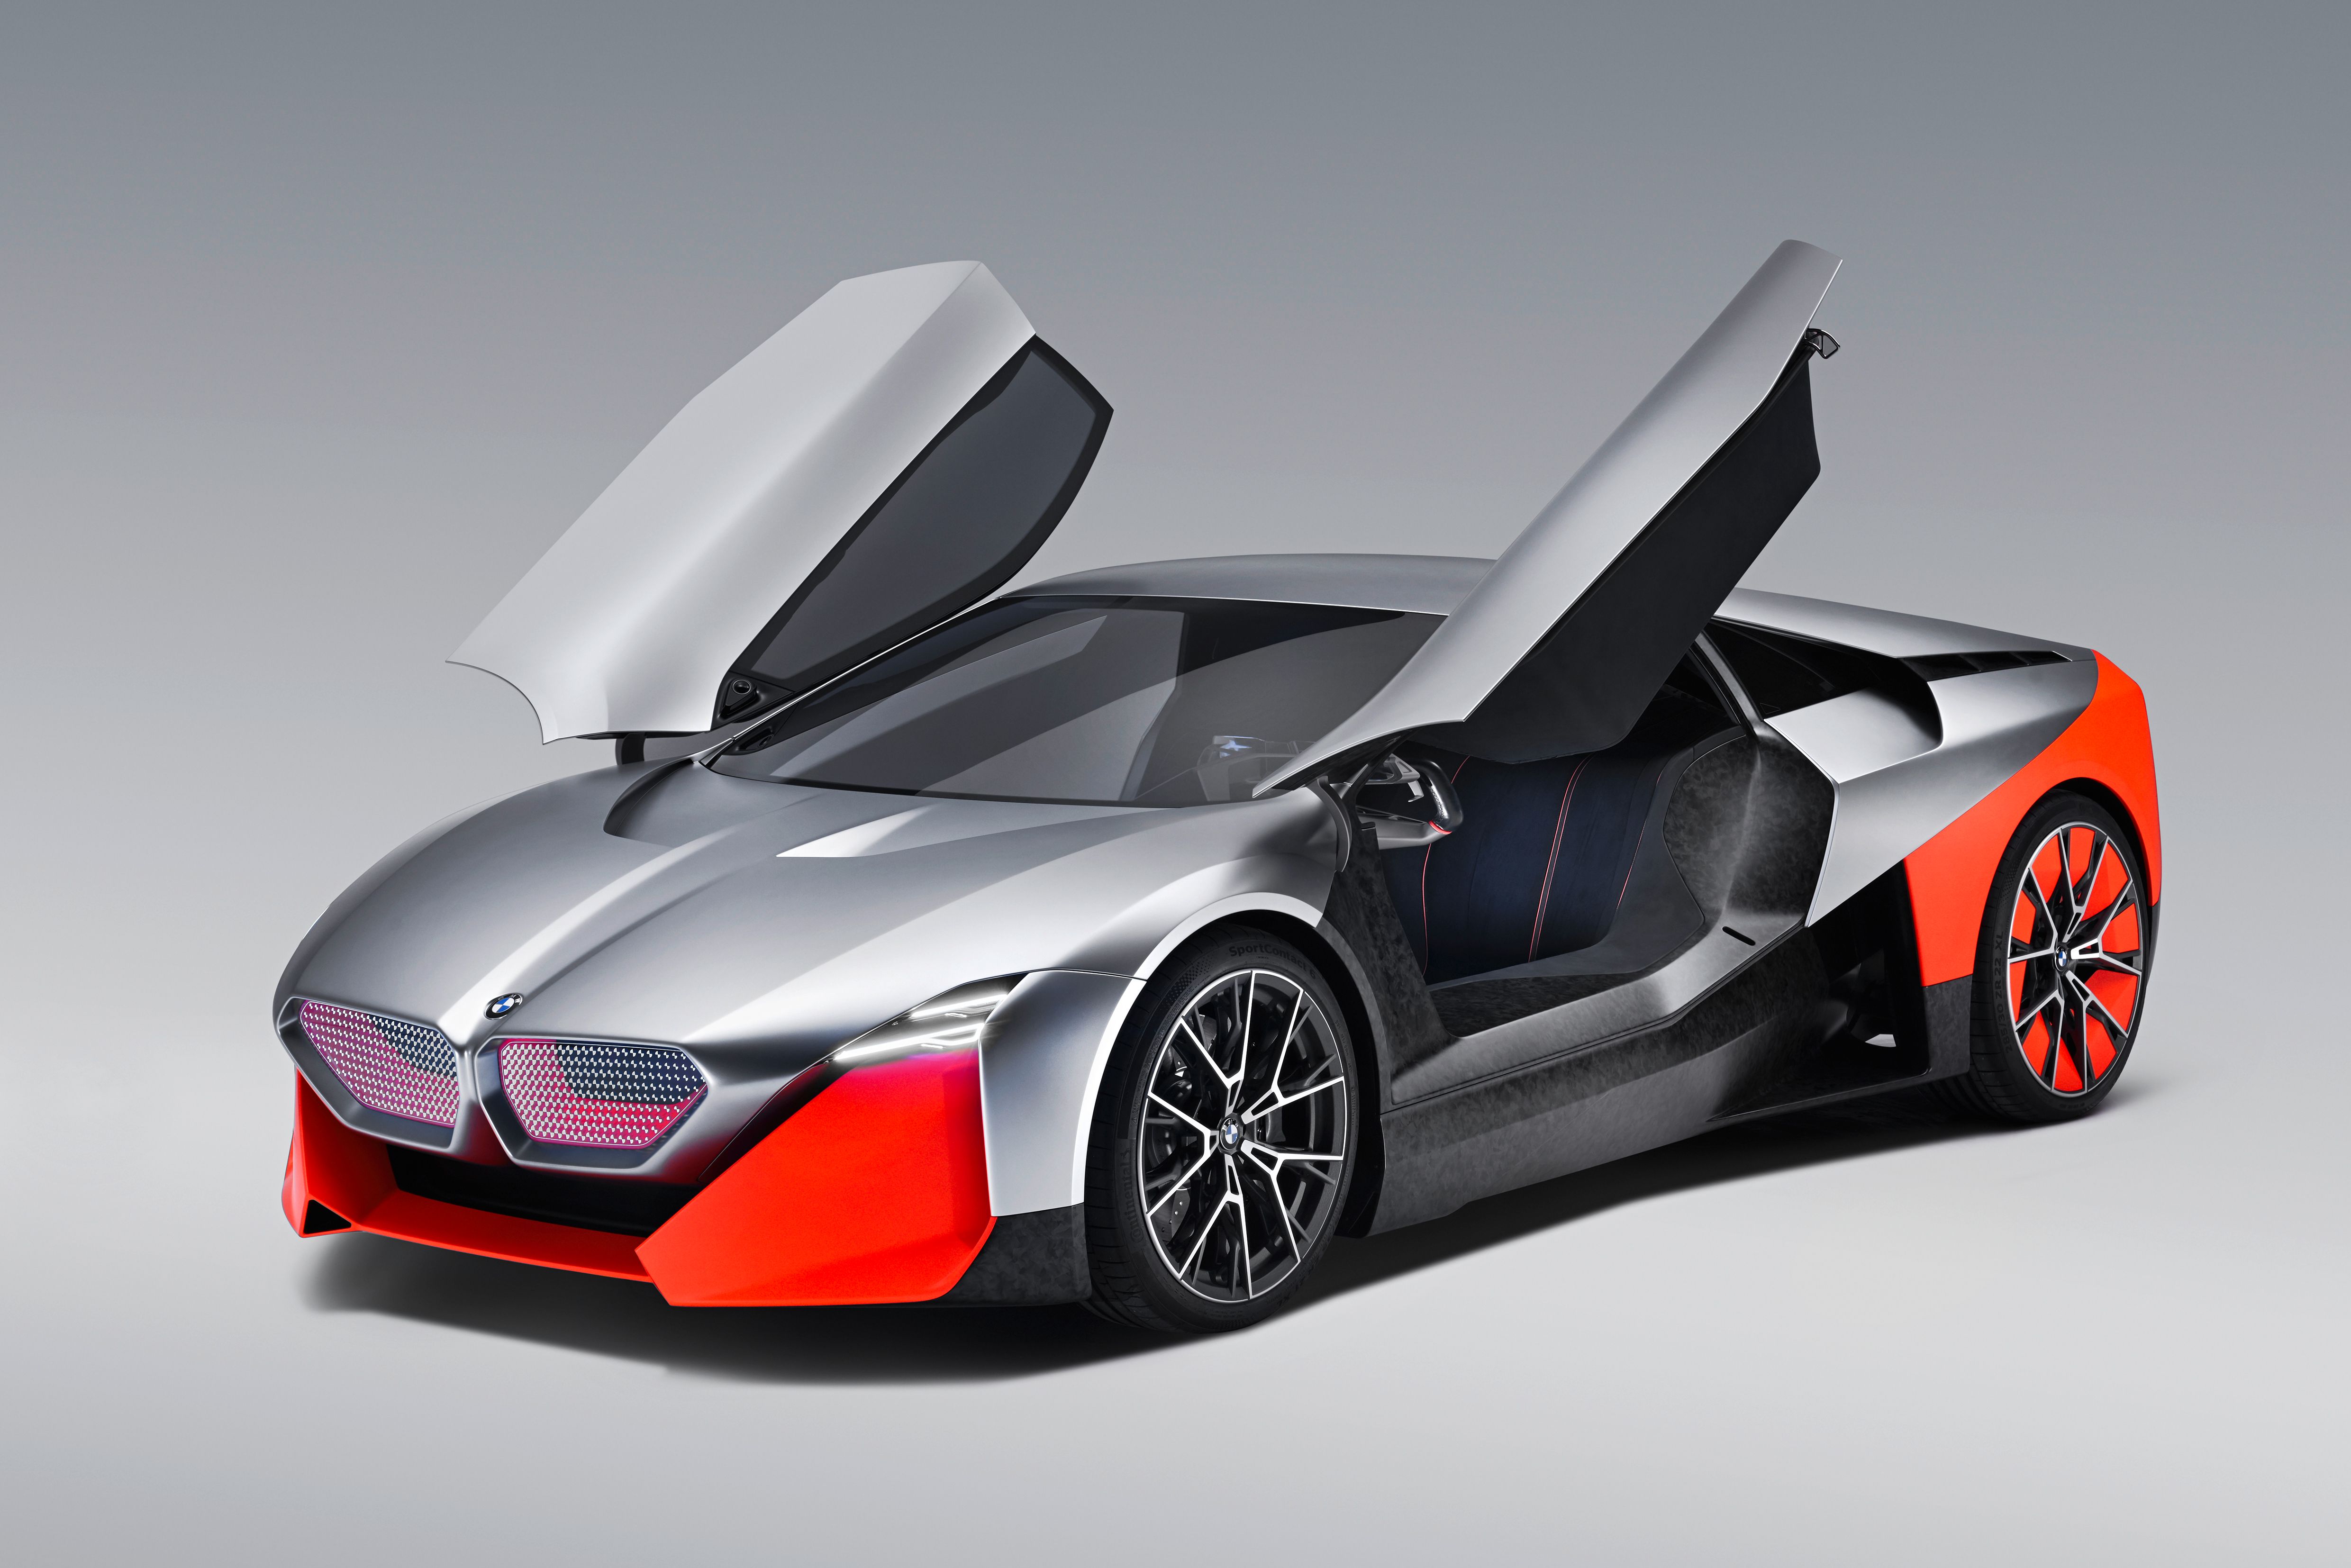 2021 The Need For Electric Cars Just Killed the BMW M Next Supercar